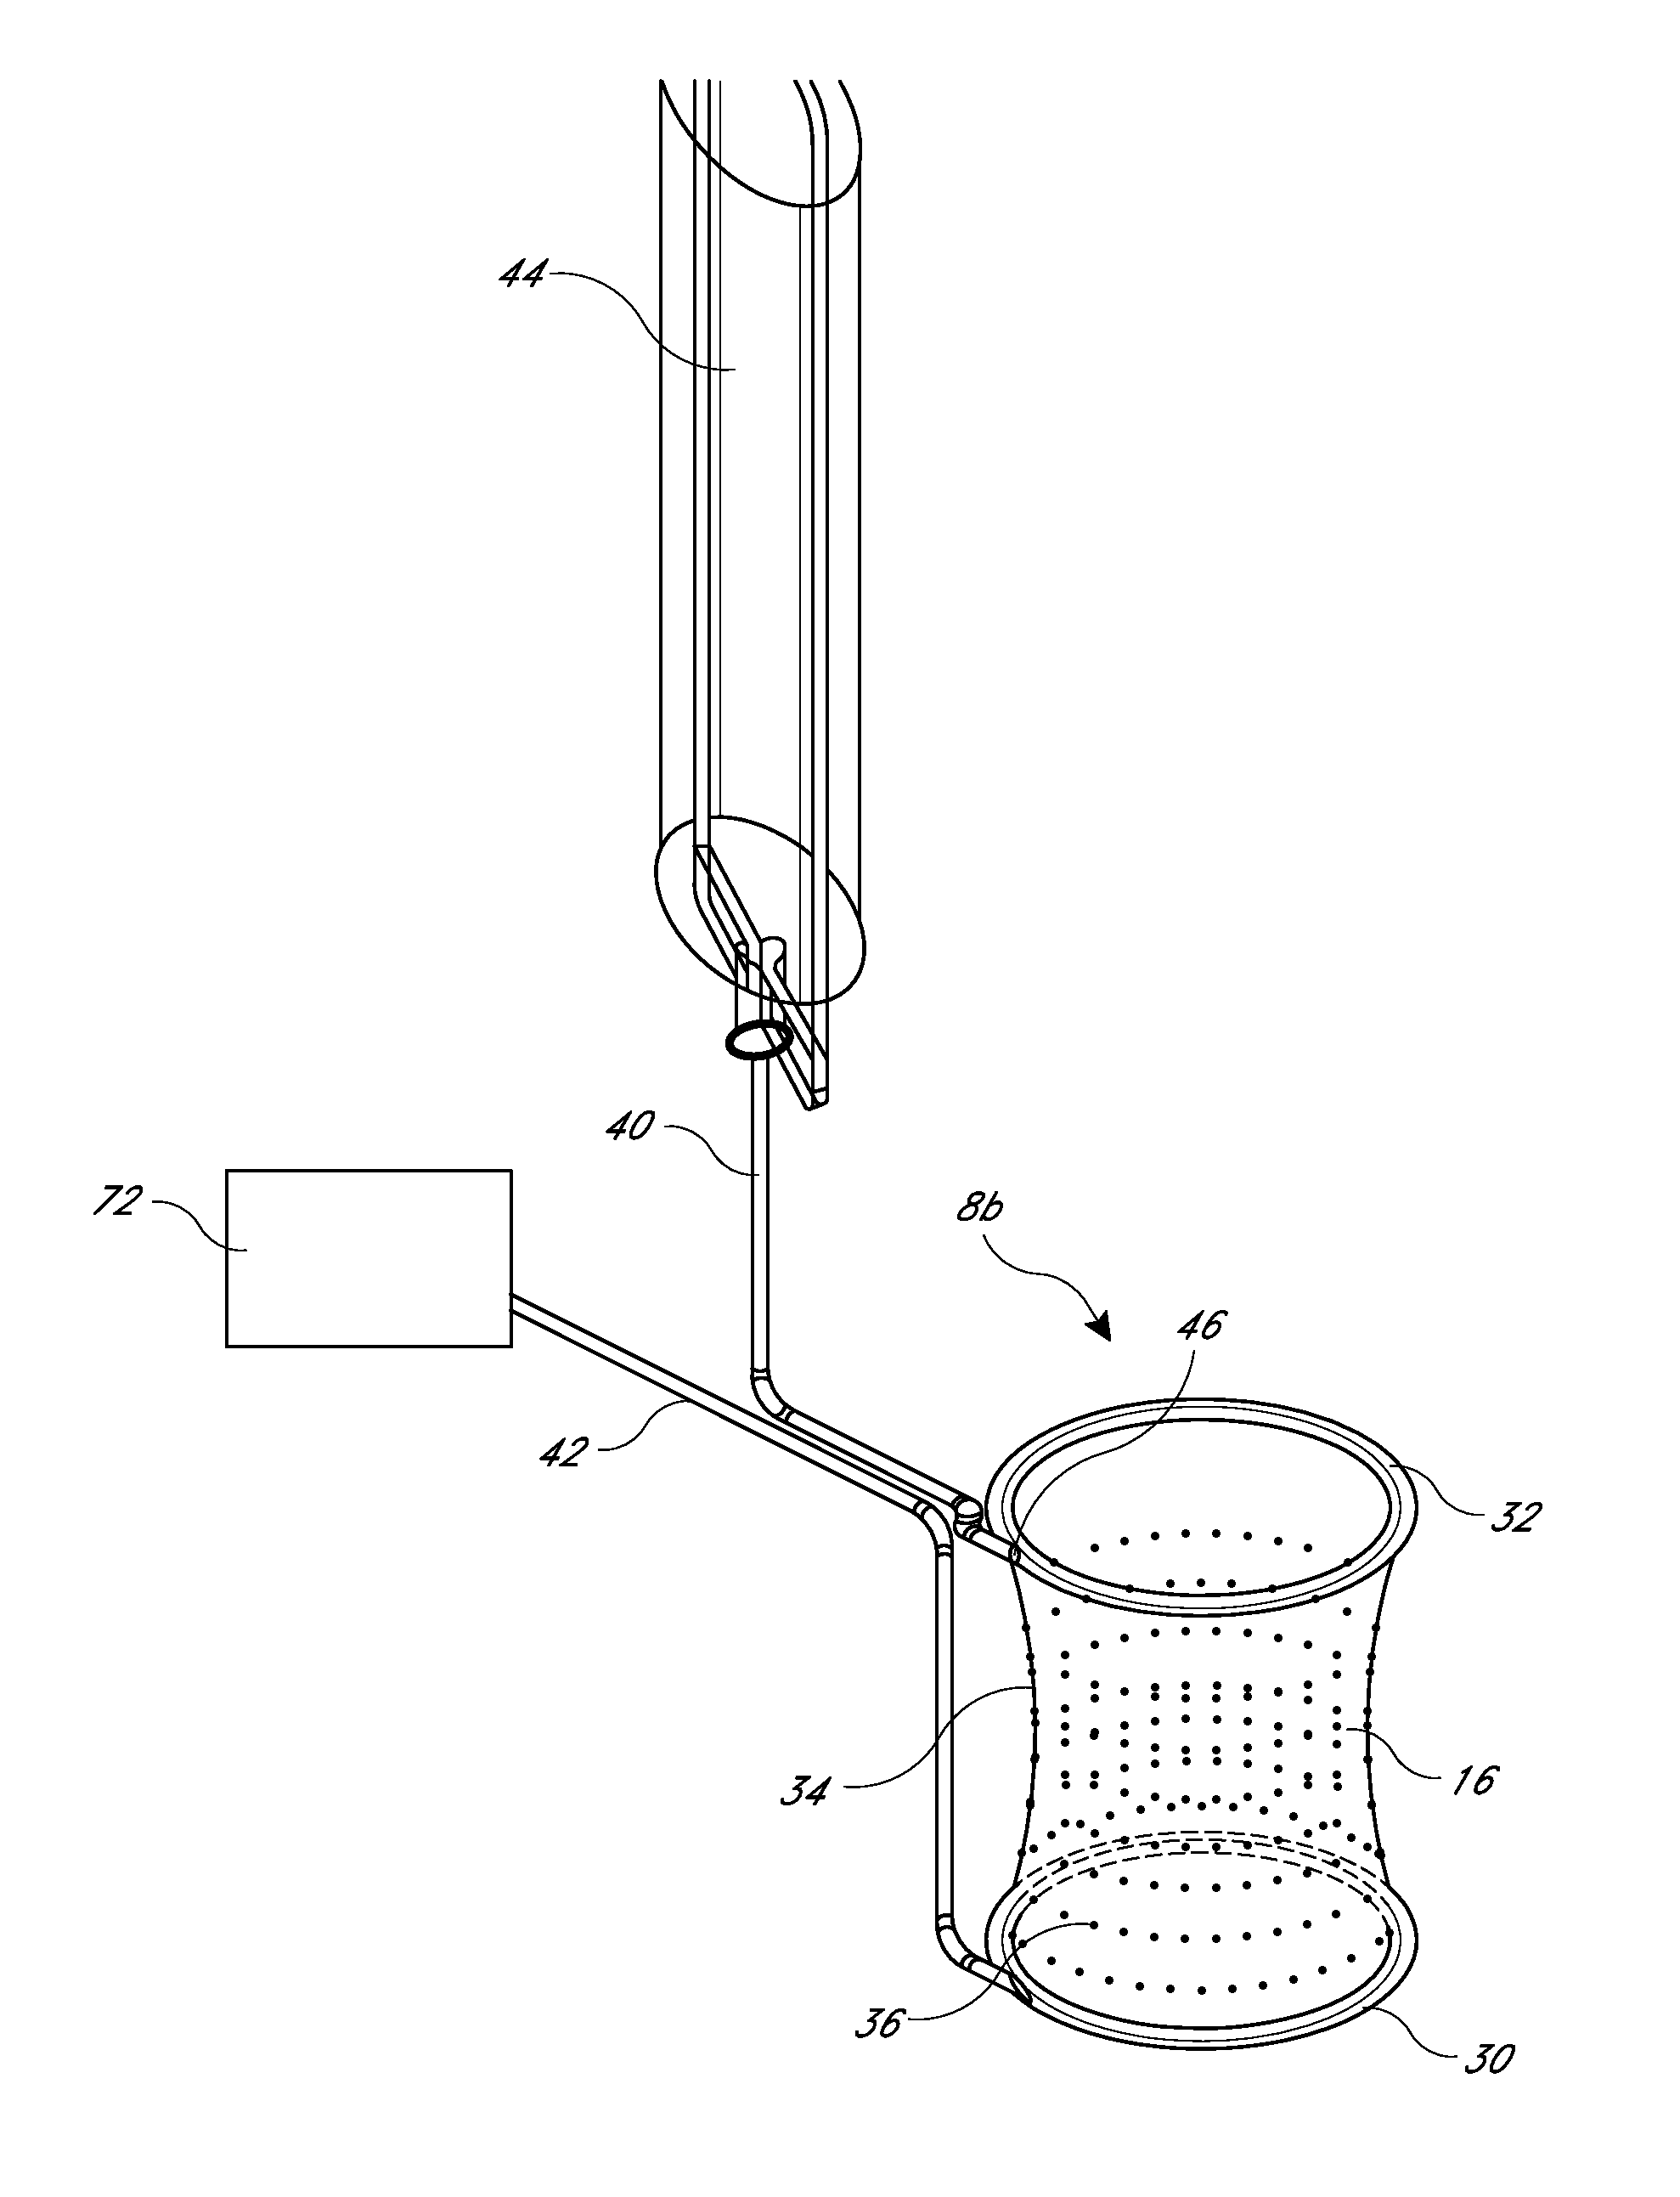 Methods for the prevention of surgical site infections